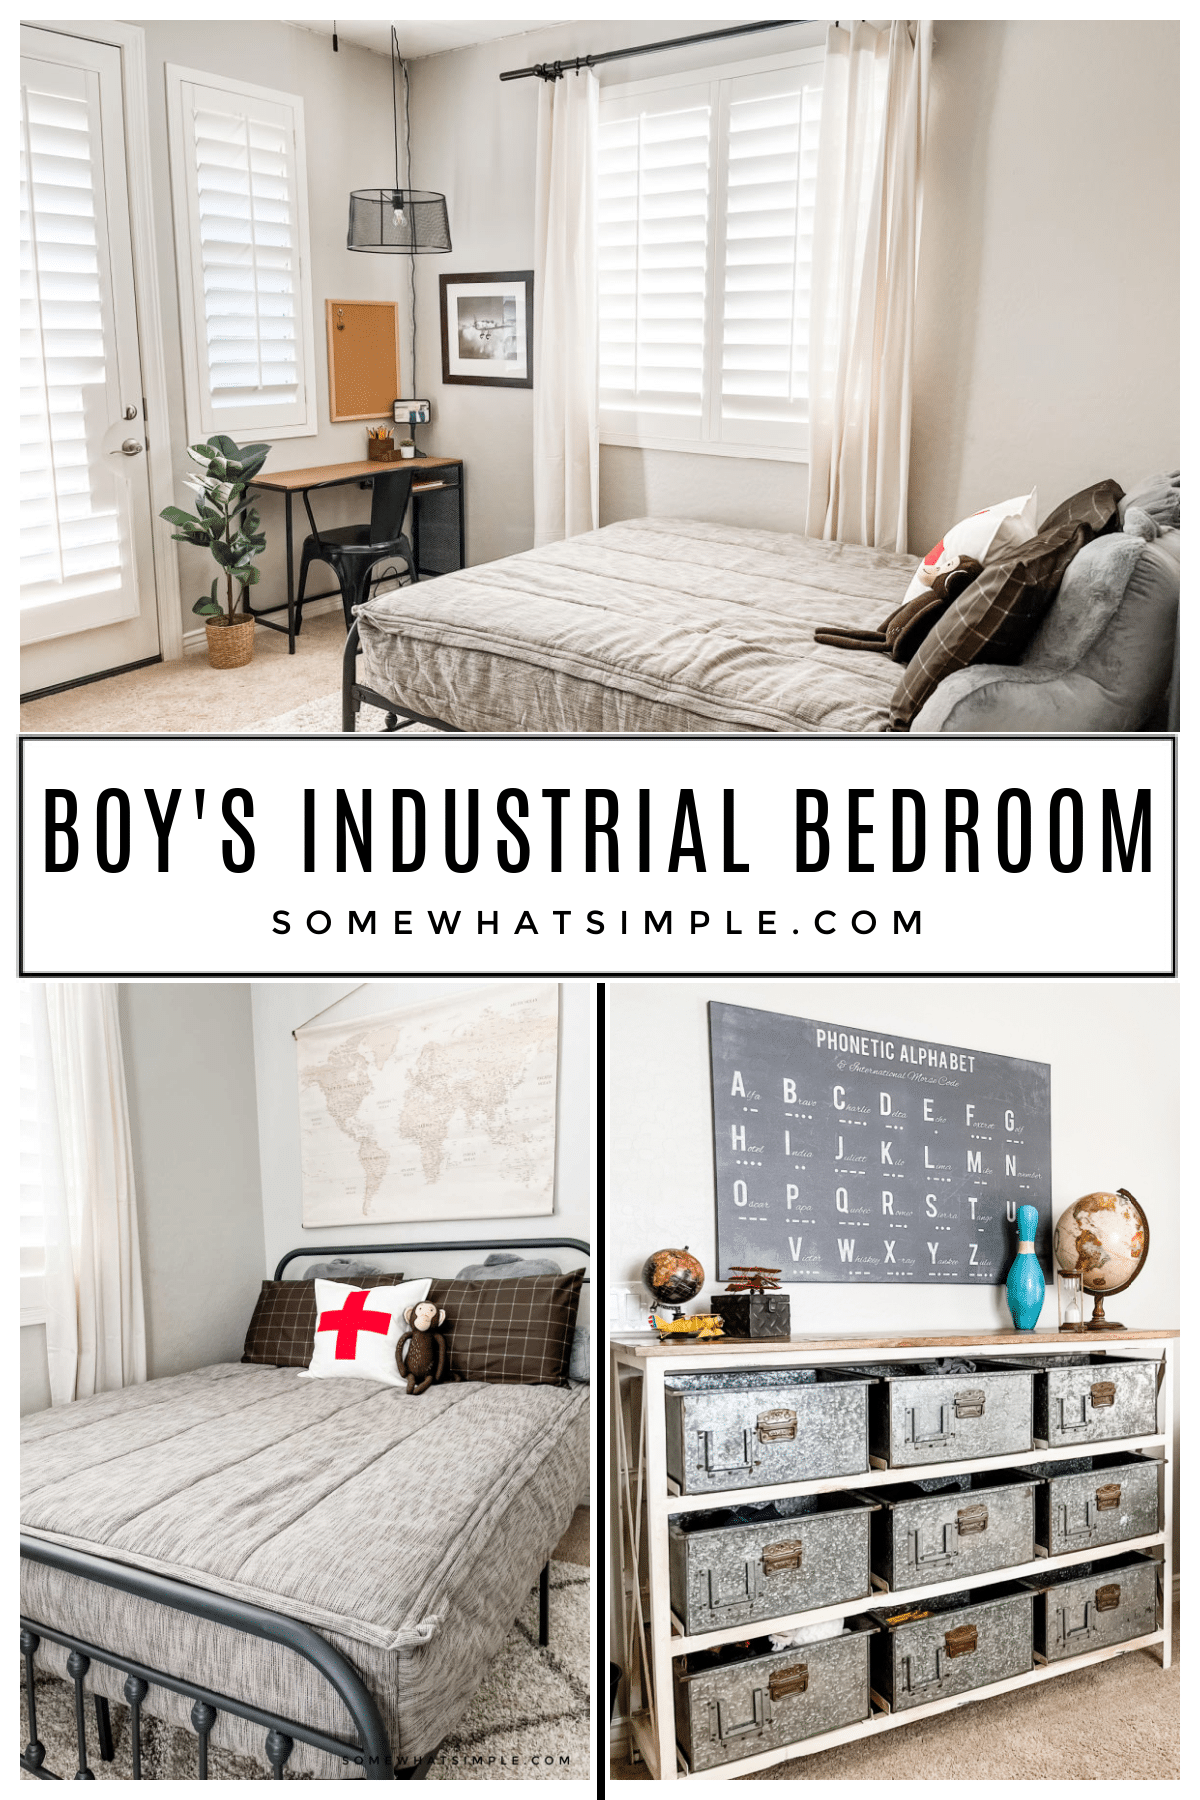 With a few bold pieces and some well-placed home accessories, you can achieve a vintage industrial bedroom makeover that's both cozy and modern. via @somewhatsimple